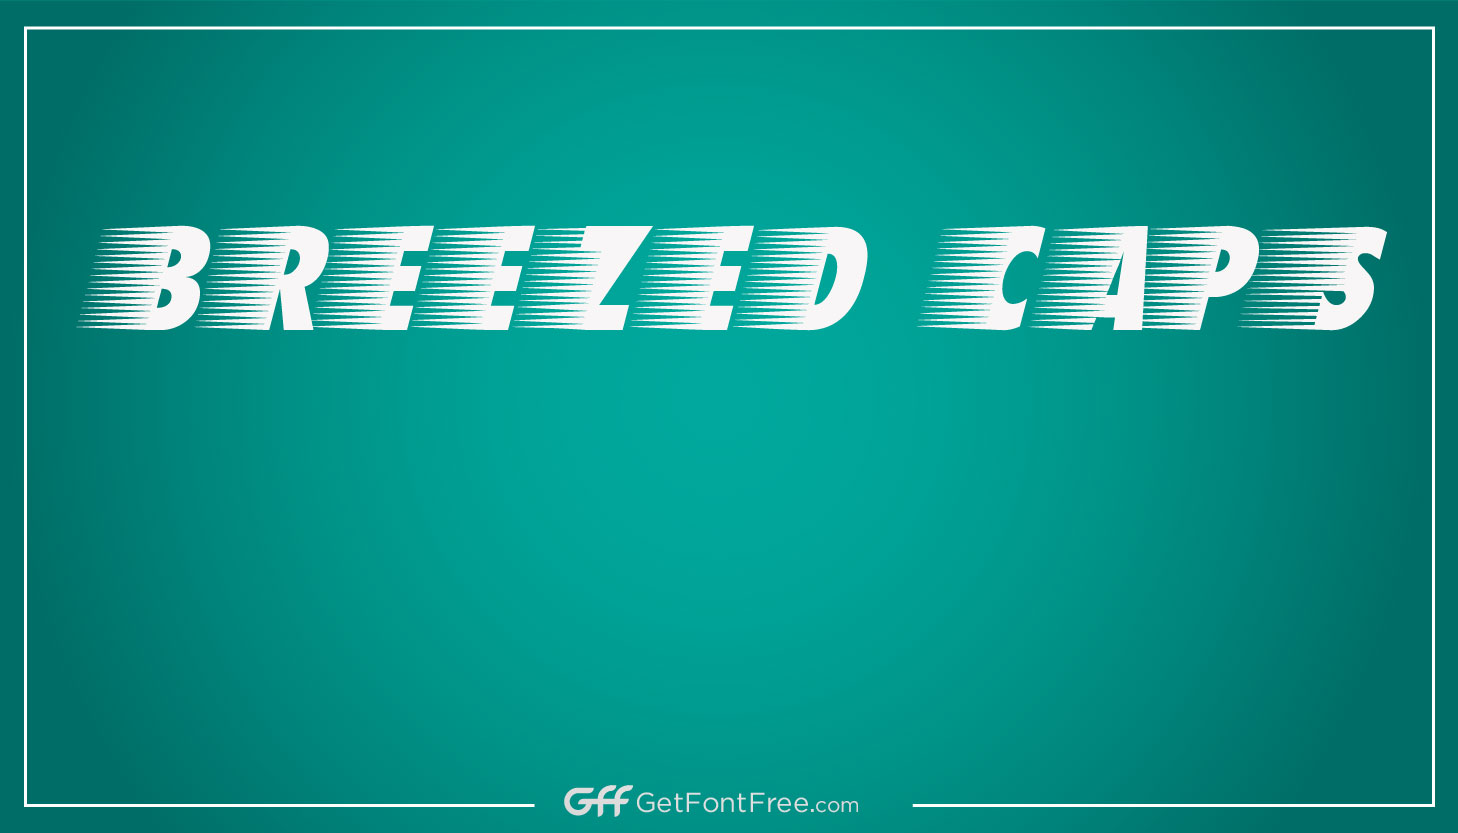 Breezed Caps Font is a playful and bold font that features all-caps letters with strong serifs and unique curves. It is well-suited for use in designs that require a touch of fun and personality, such as posters, headlines, or branding materials.